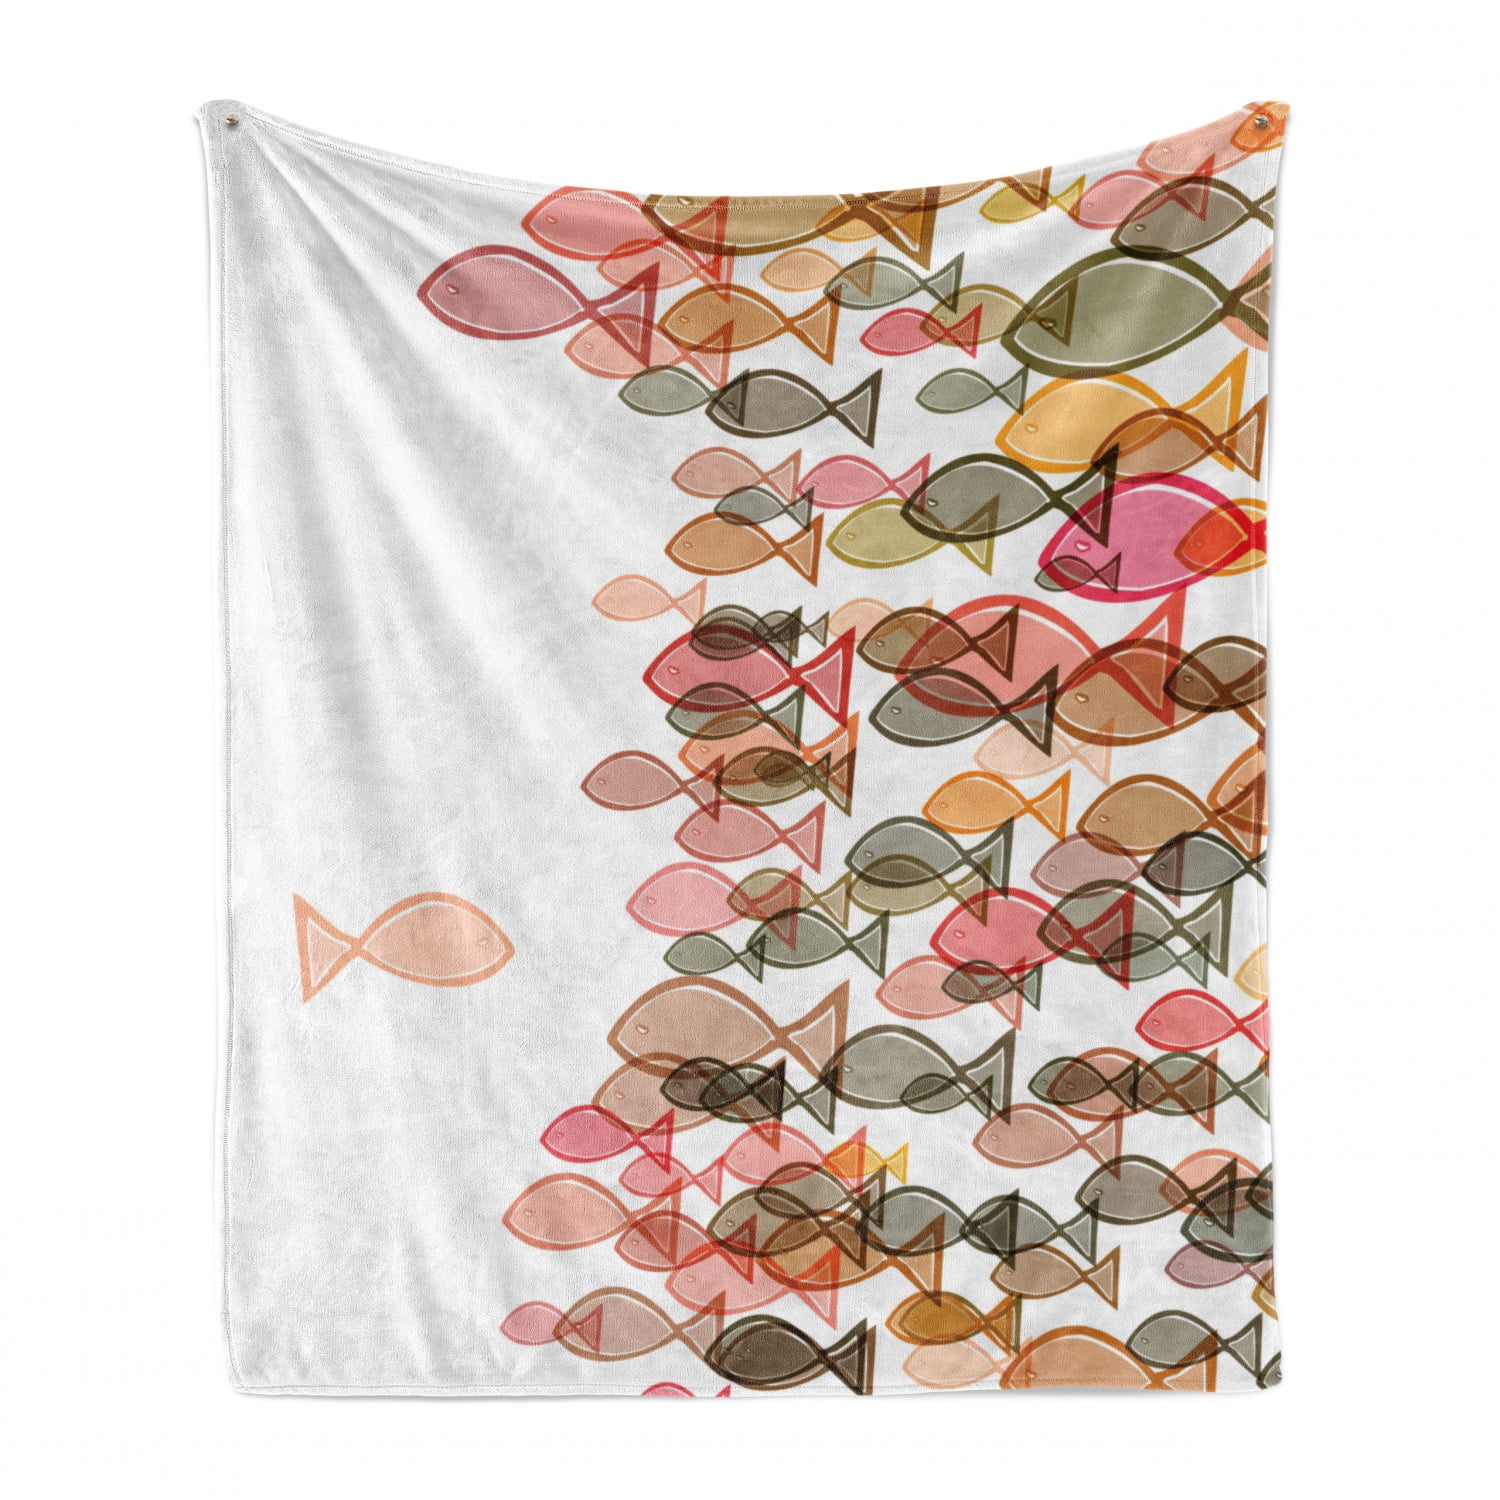 Cozy Plush for Indoor and Outdoor Use Ambesonne Nautical Soft Flannel Fleece Throw Blanket 50 x 60 Fish Flock Facing Others Design Seashore Print in Soft Pastel Color Tones Multicolor 